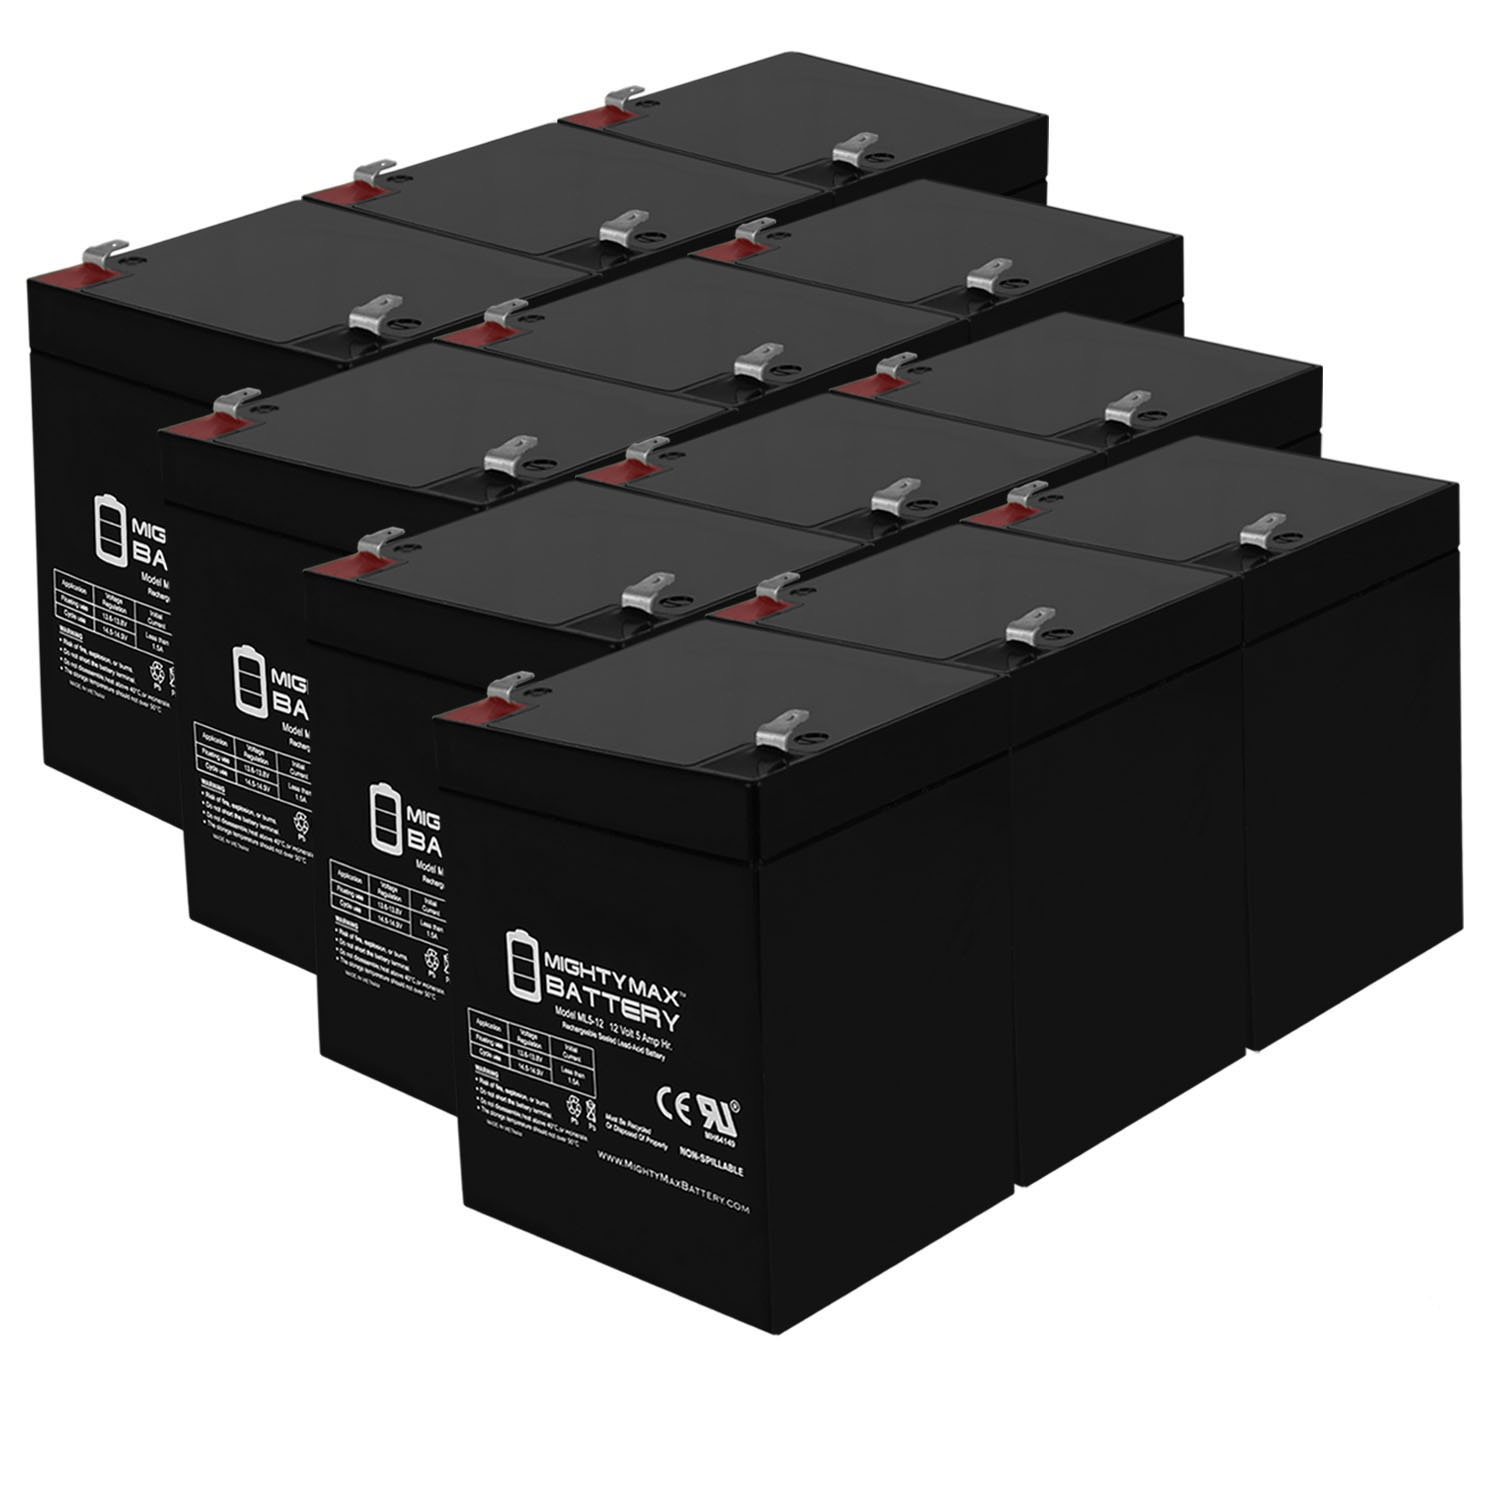 12V 5AH SLA Replacement Battery for Power PM12-5 - 12 Pack